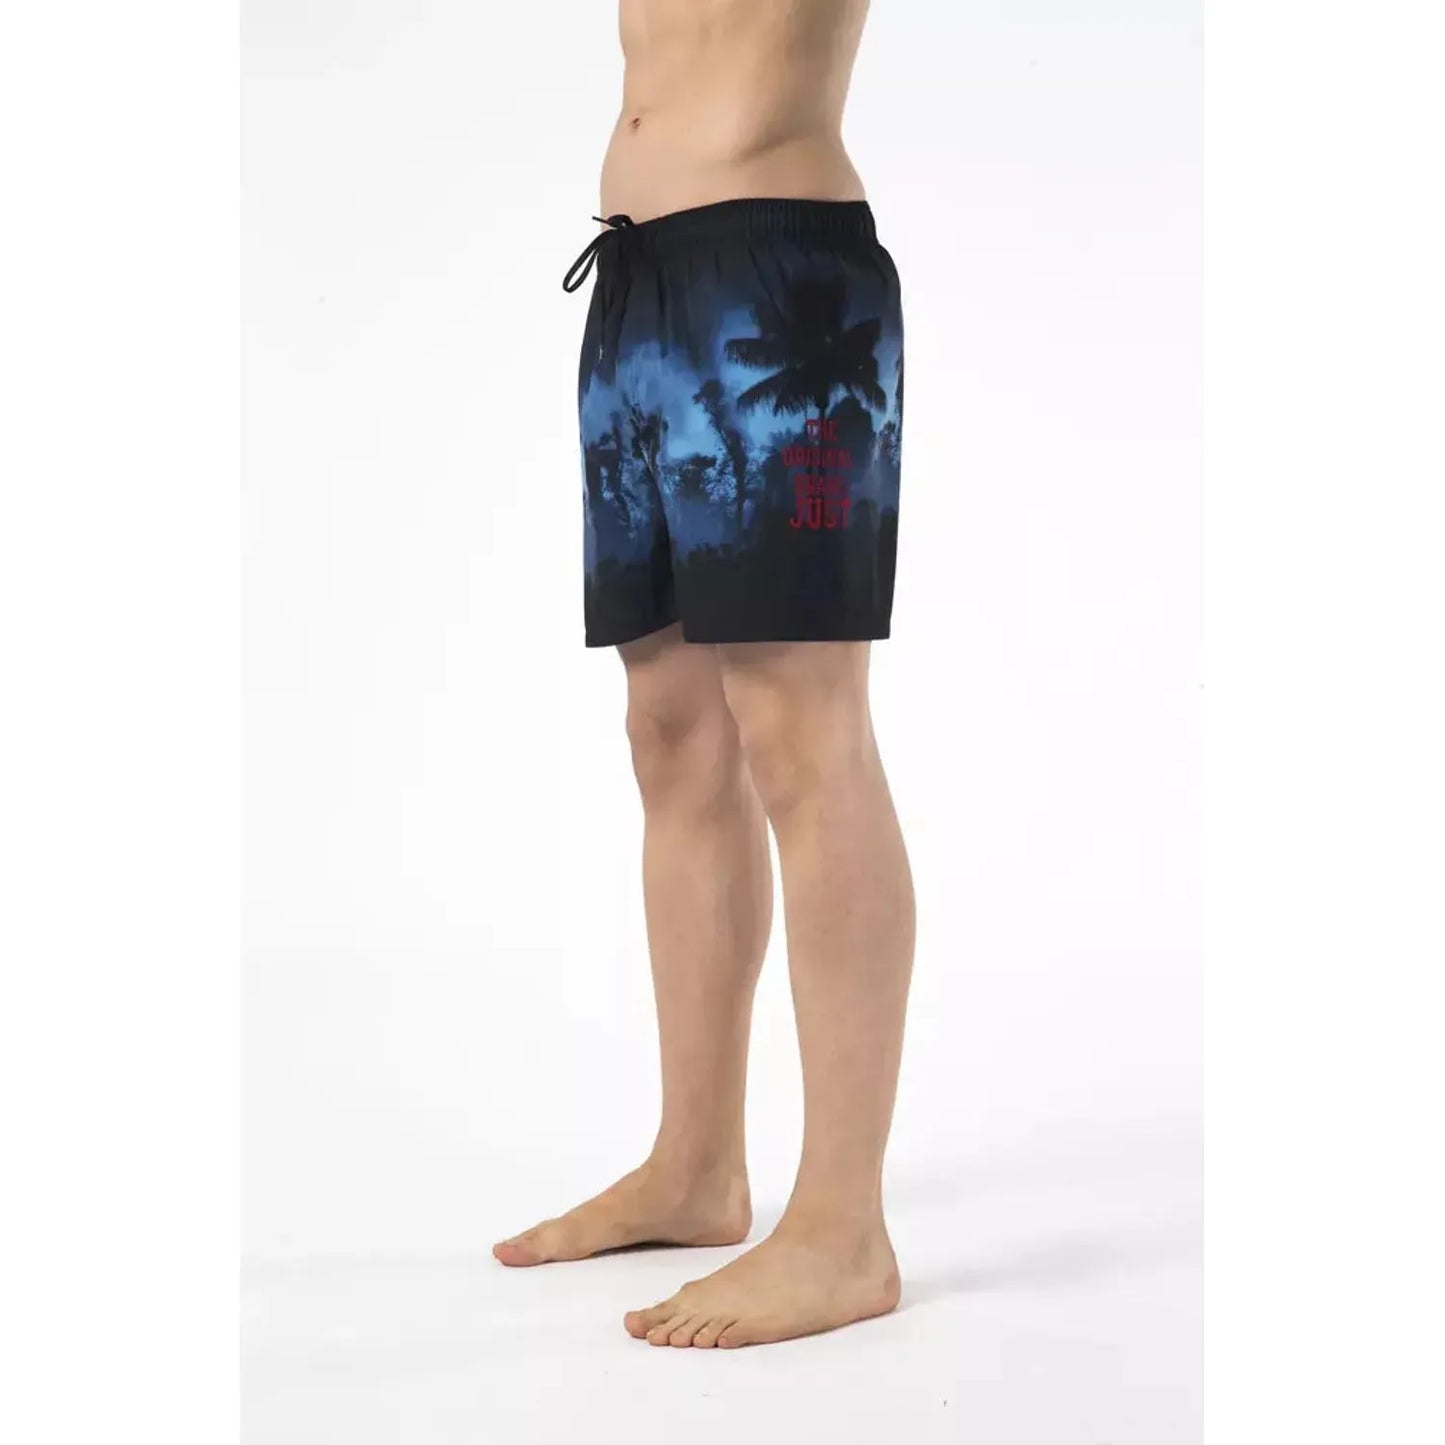 Just Cavalli Chic Printed Beach Shorts with Embroidered Logo black-swimwear-1 product-22578-1248736380-20-e1147a89-d5f.webp